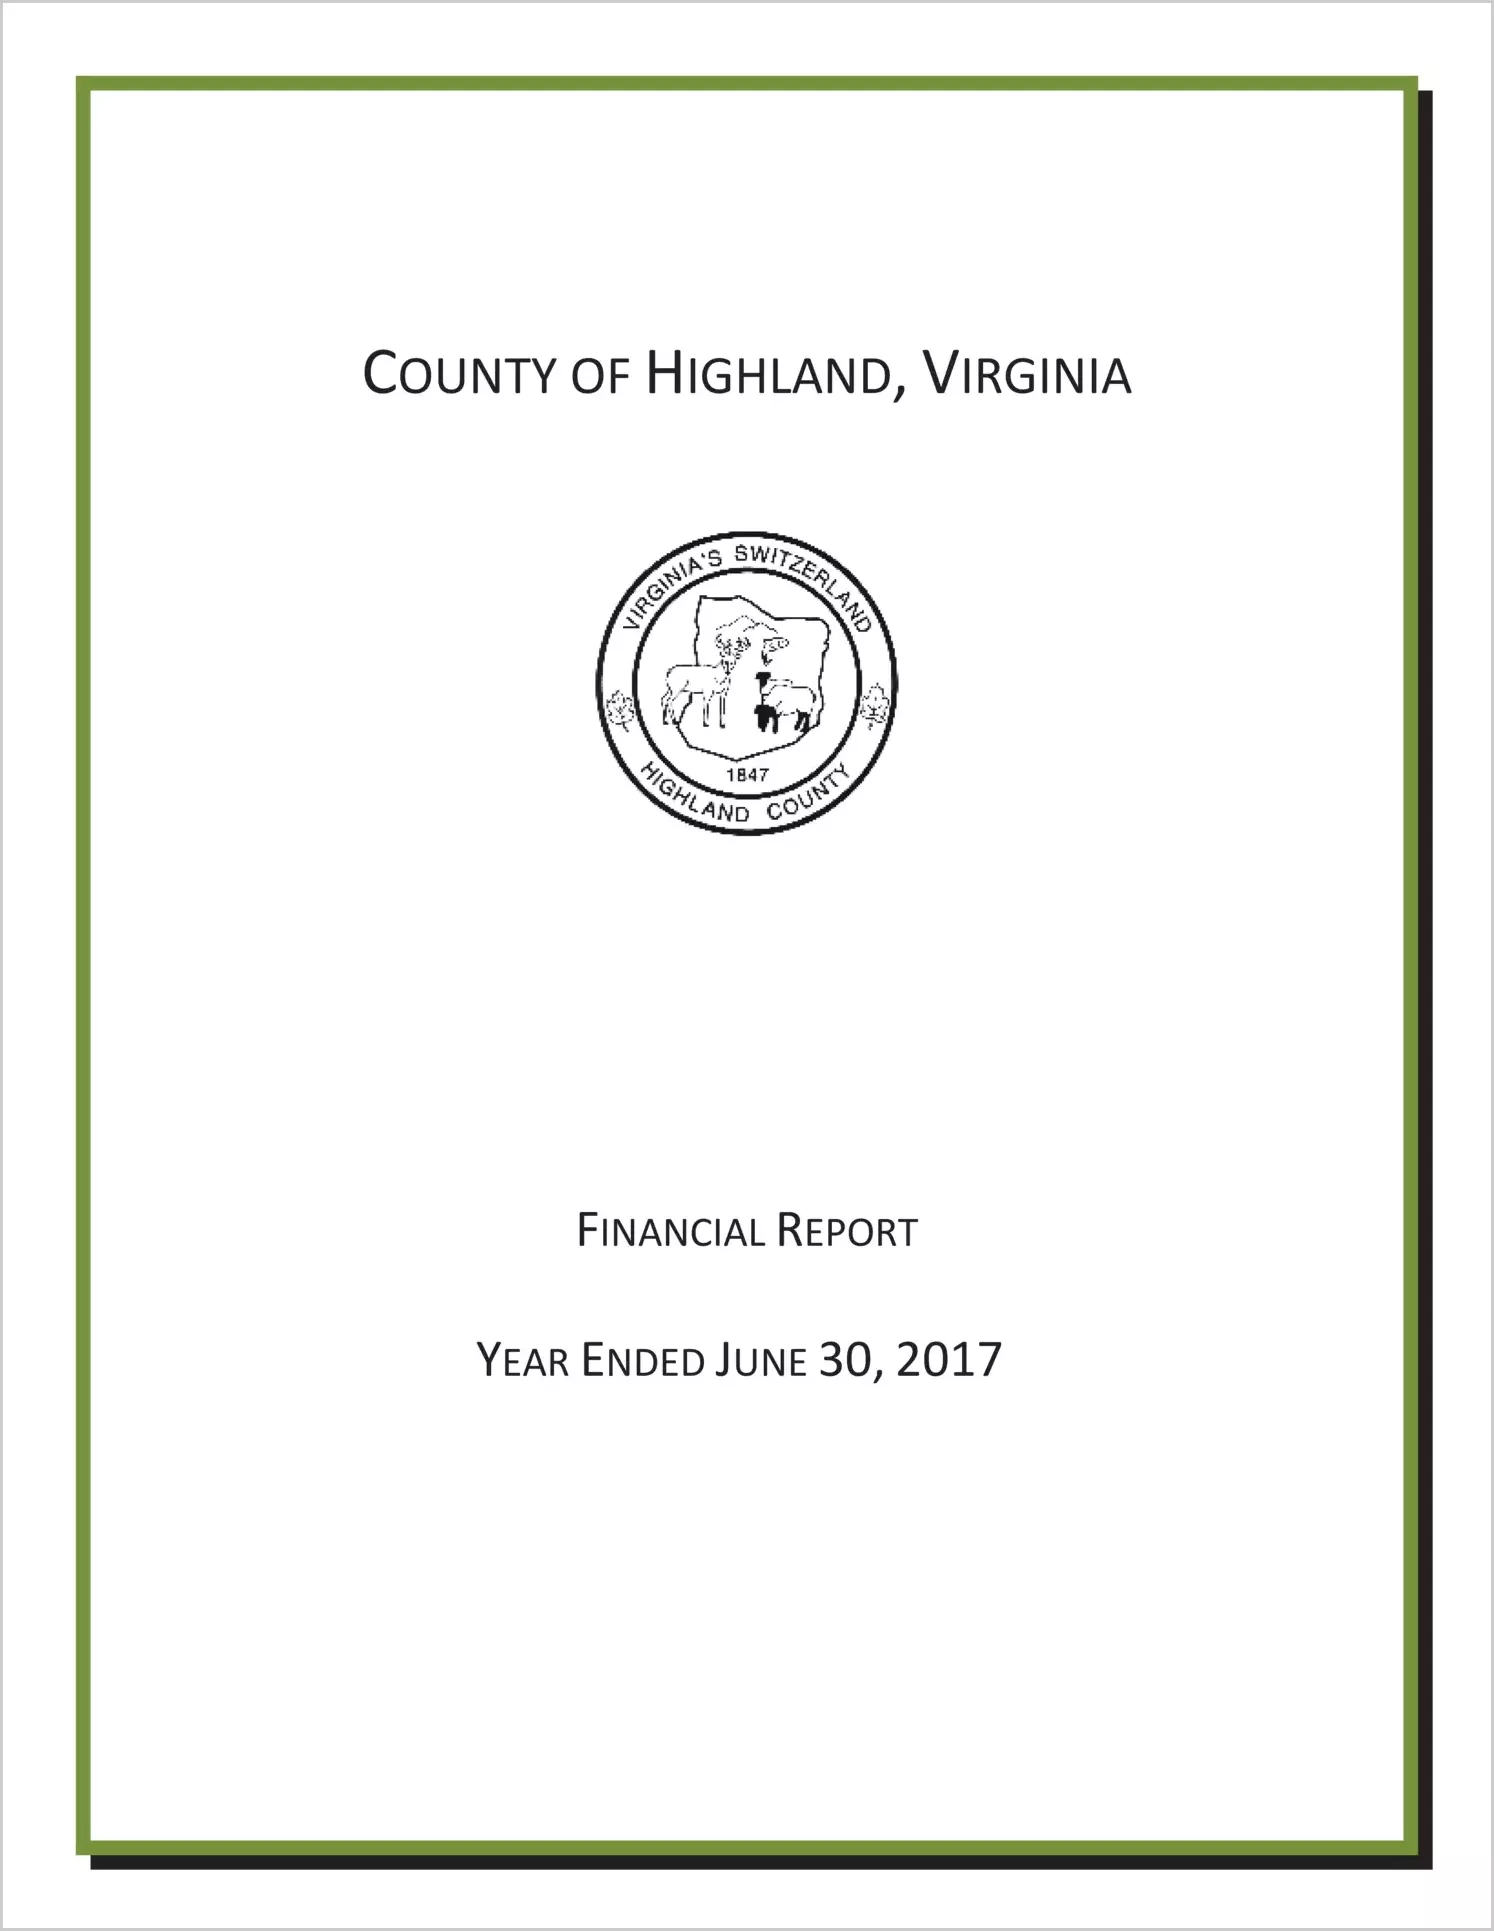 2017 Annual Financial Report for County of Highland